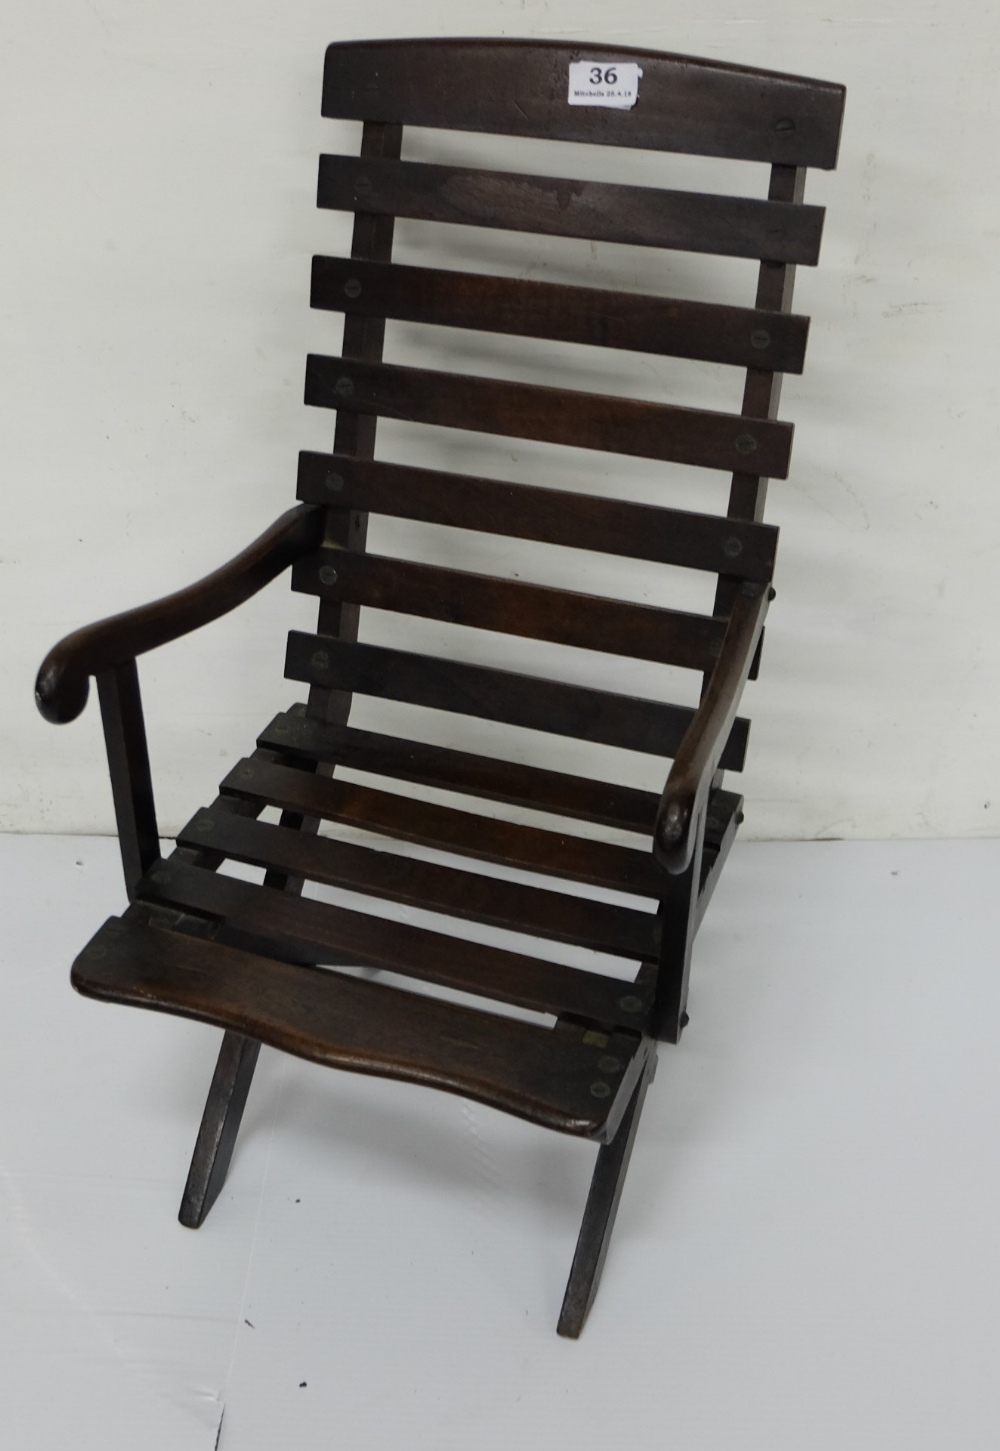 Miniature walnut deck chair with slatted seat and back, 12"w x 24"h